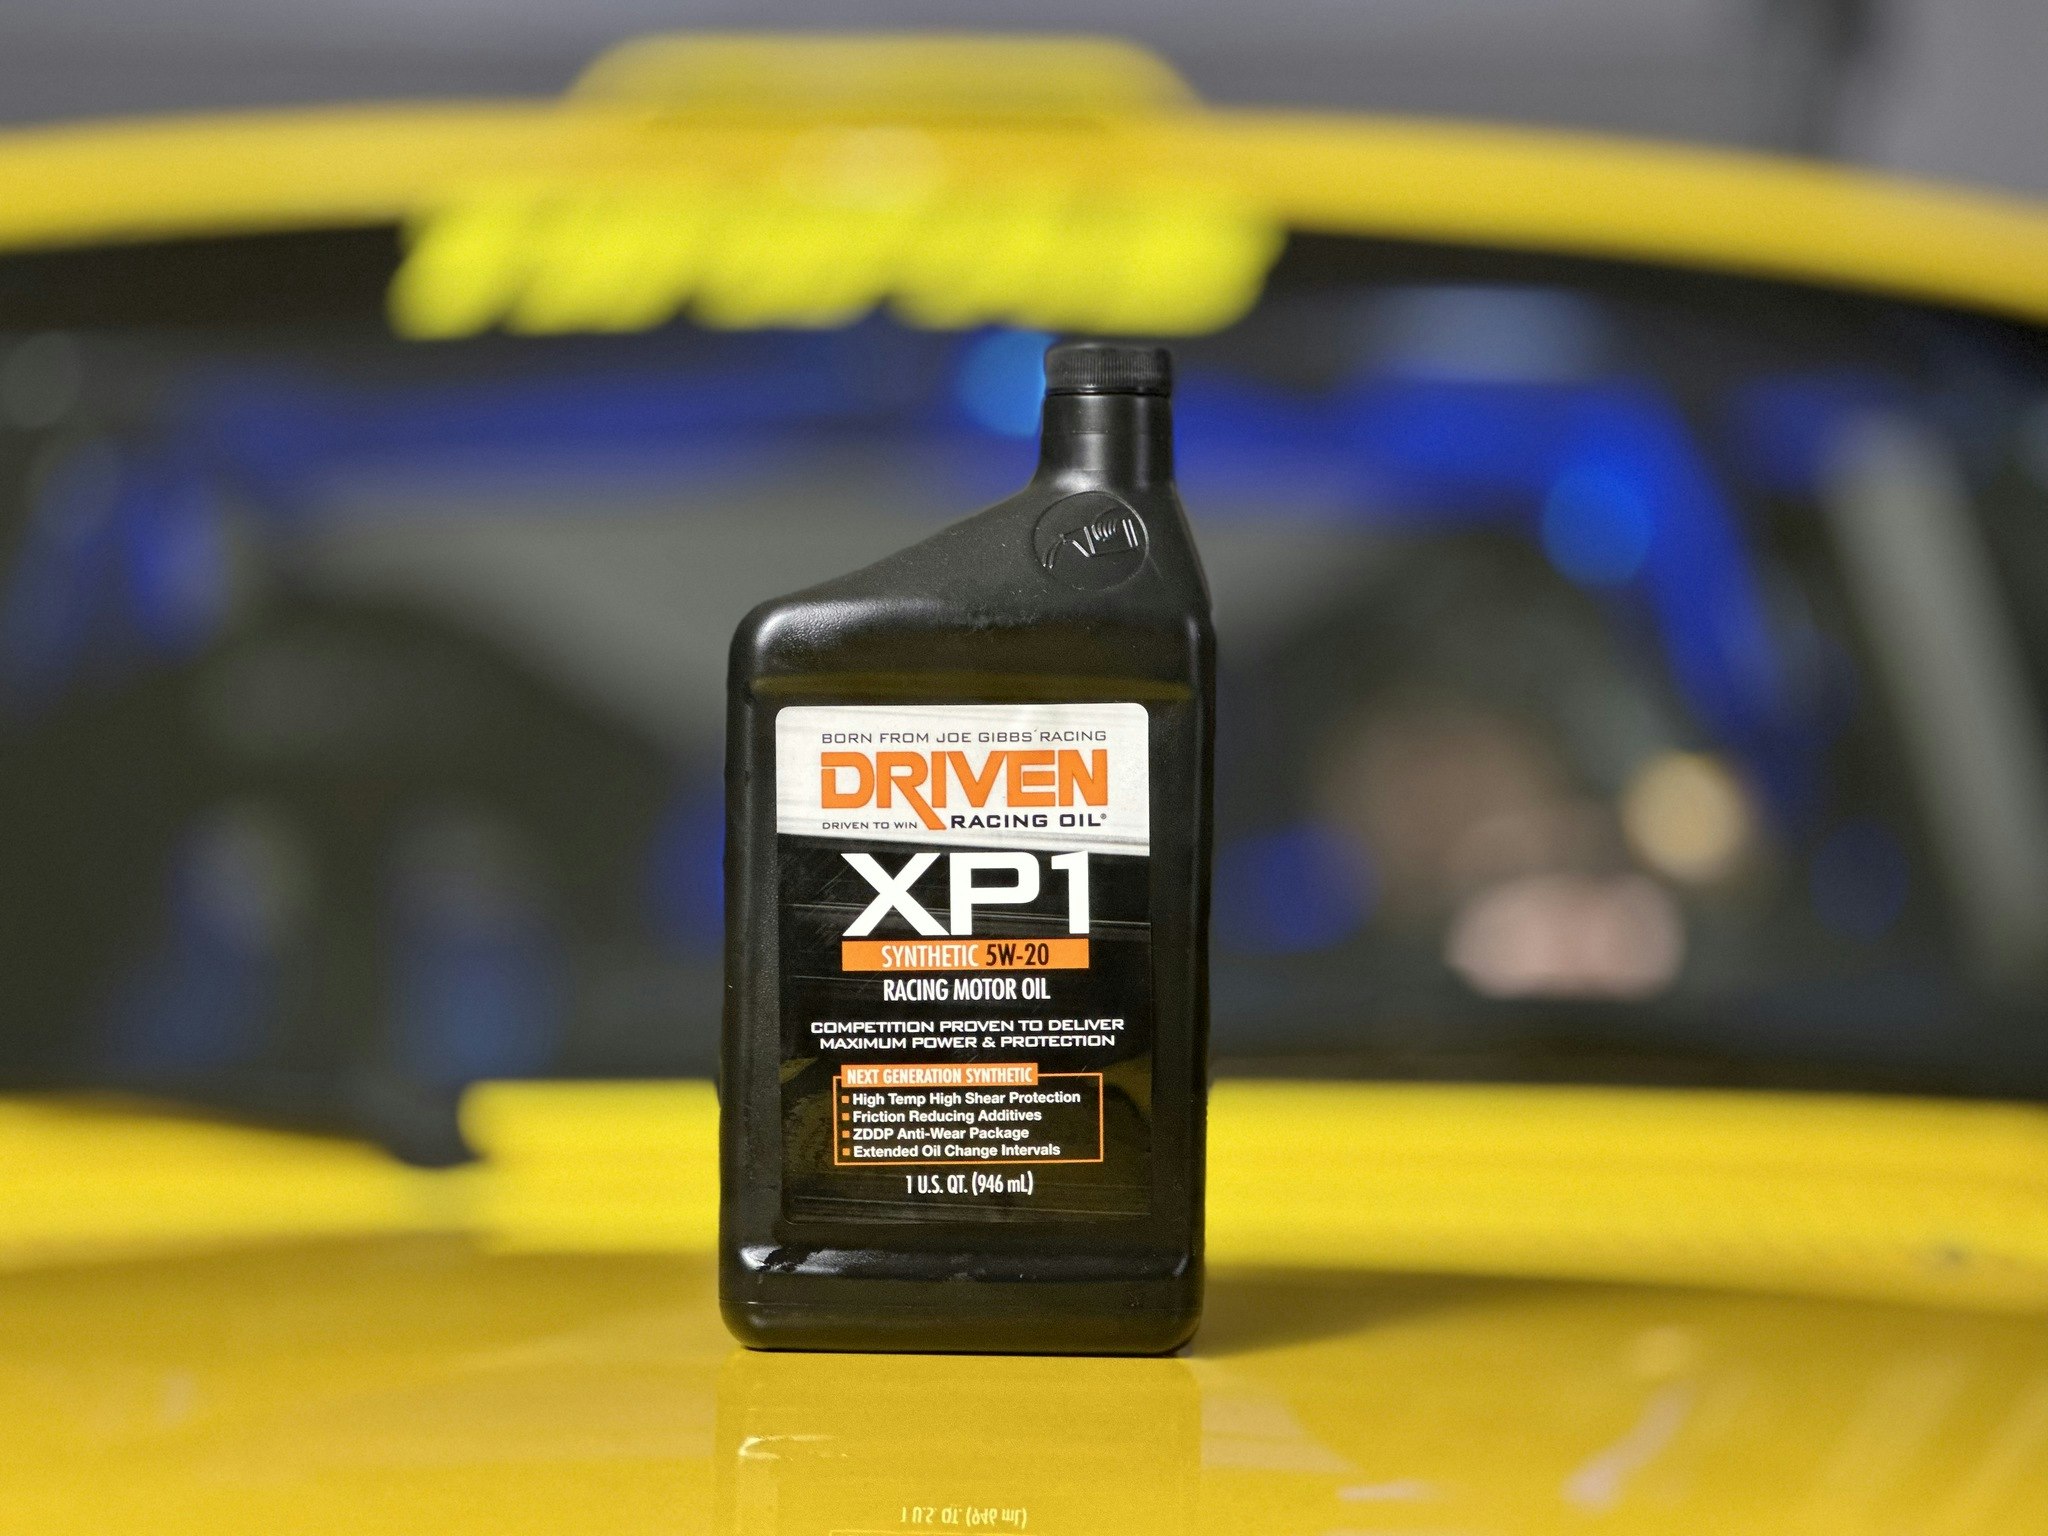 Driven Racing Oil XP1 5W-20 Synthetic